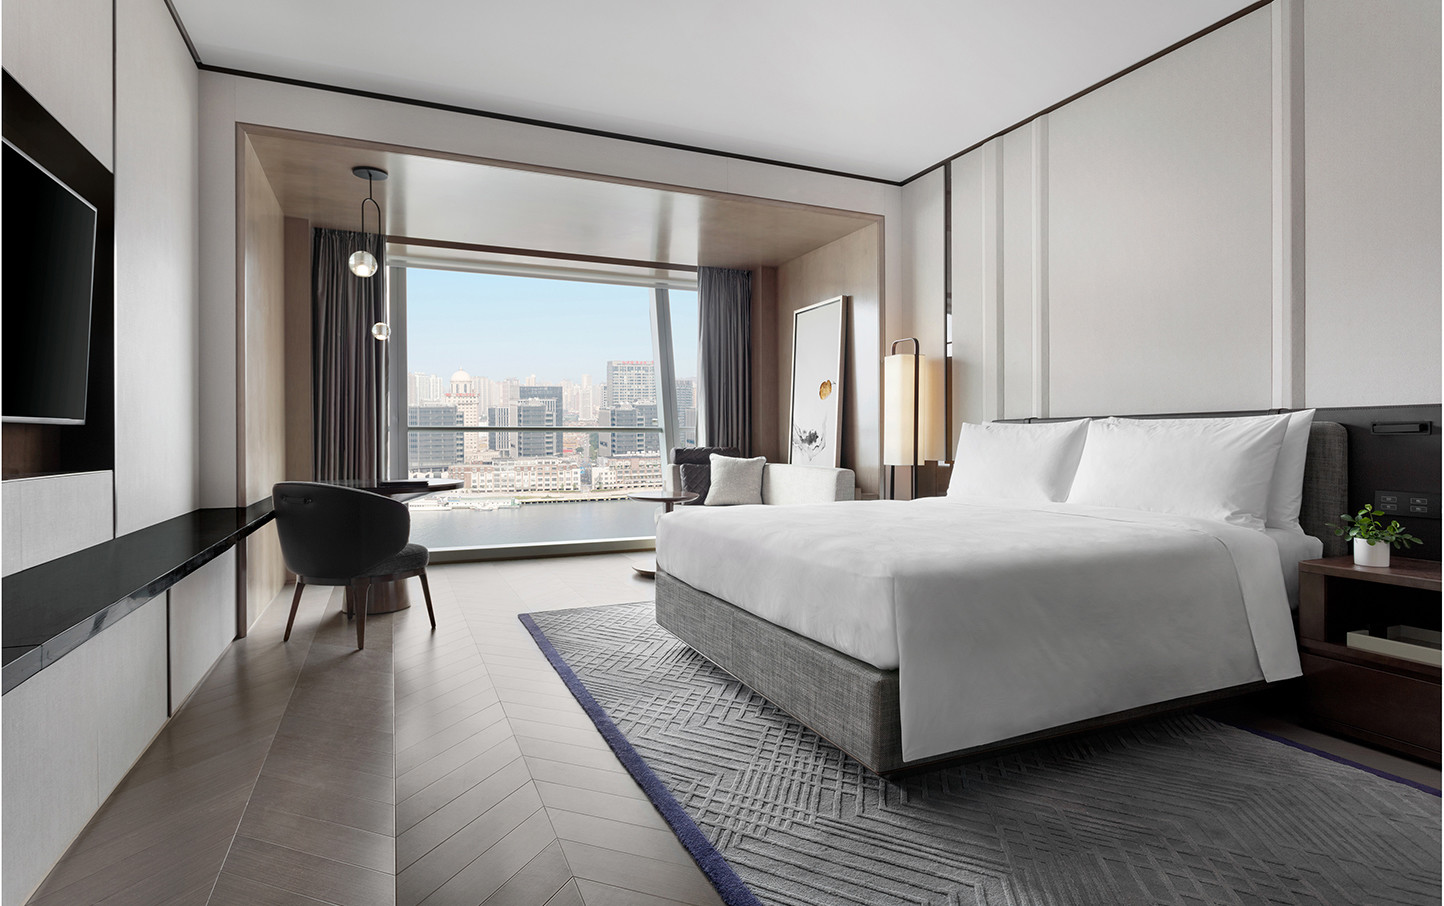 news-main-jw-marriott-debuts-first-marquis-hotel-in-china.1565431265.jpg